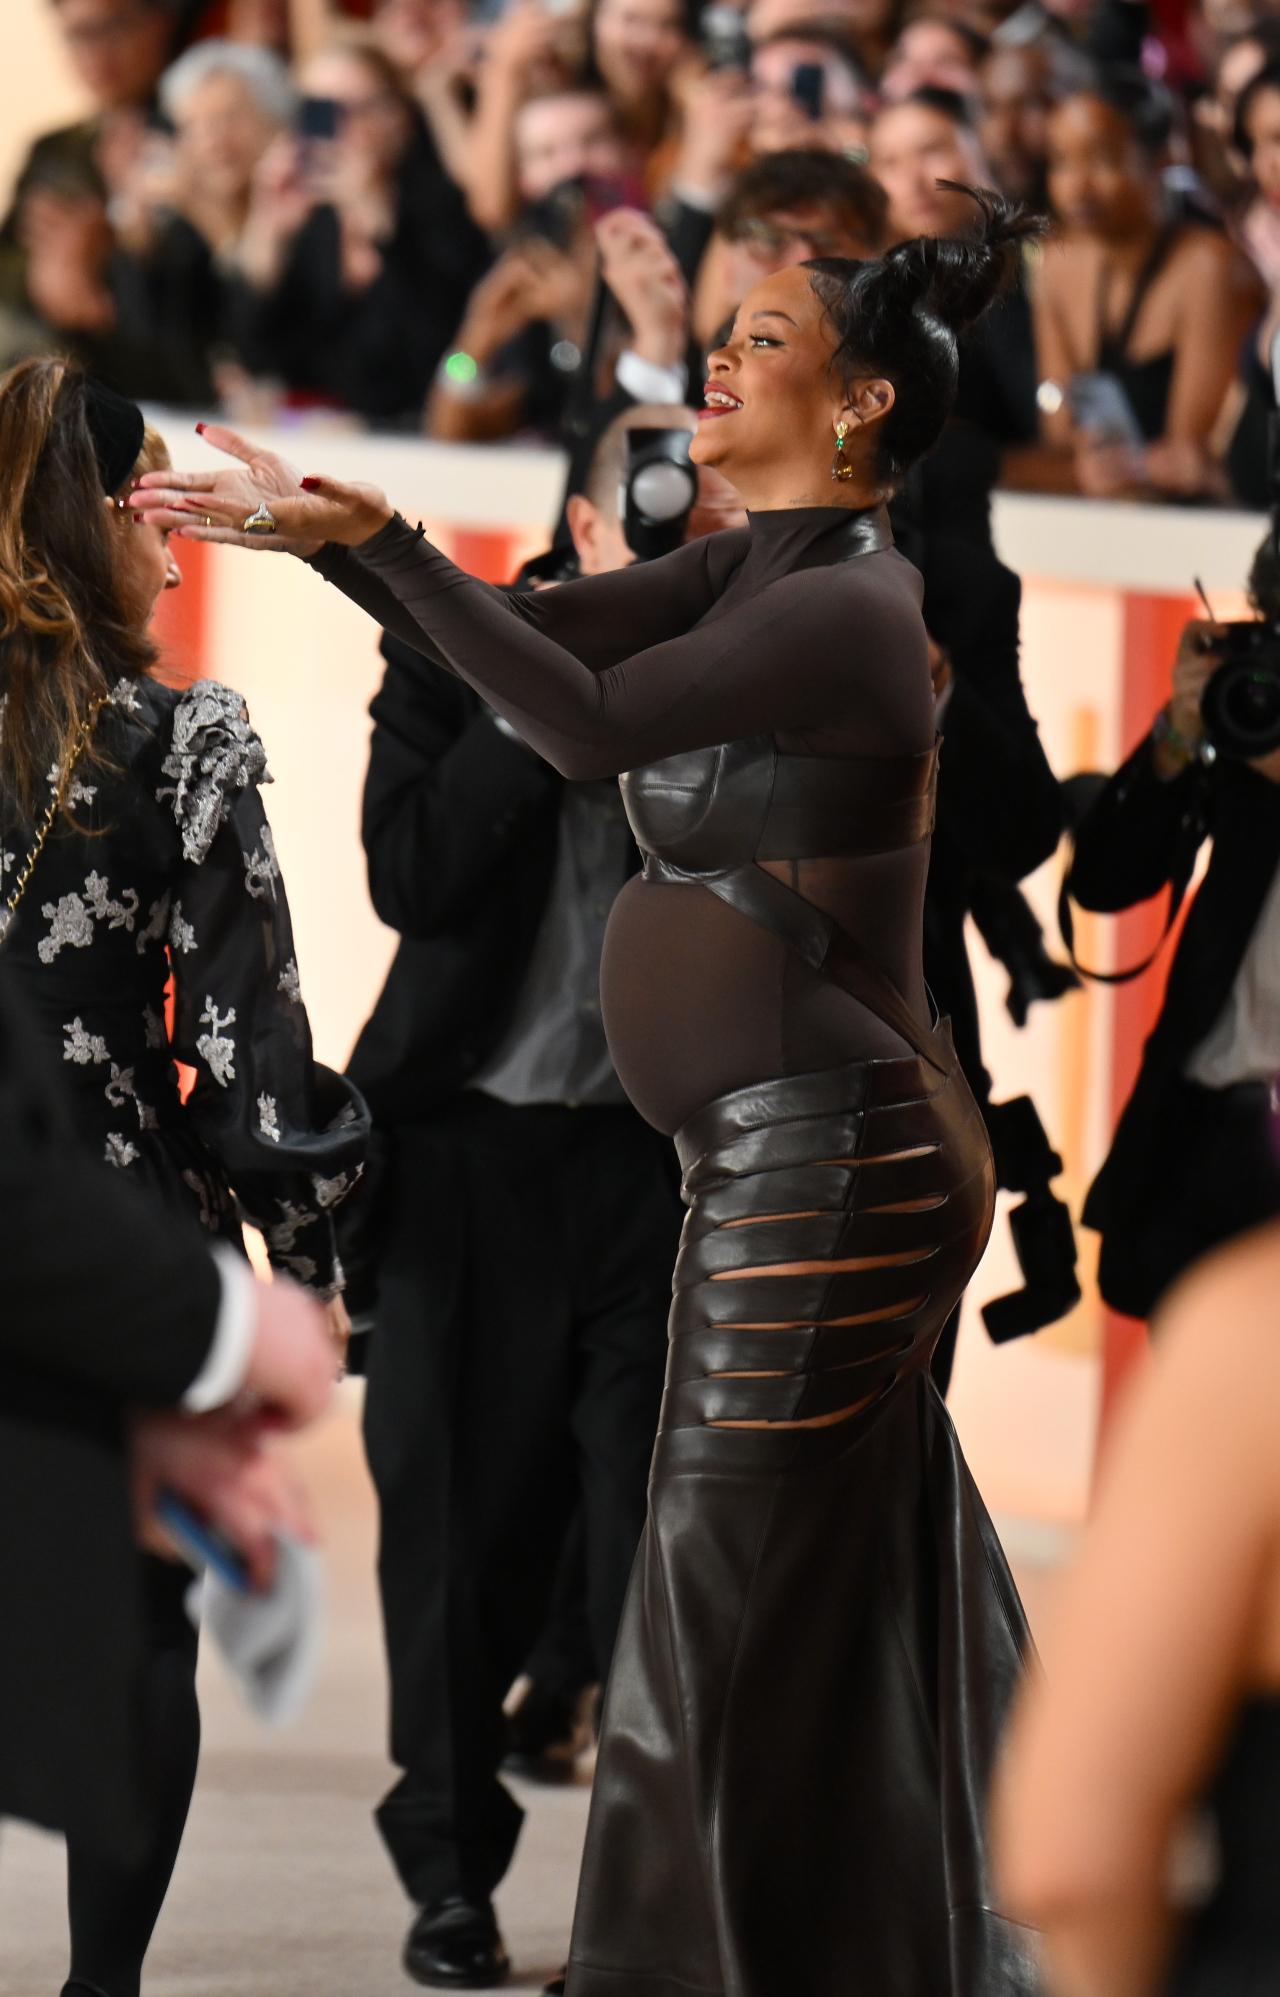 Rihanna flaunted her baby bump in a striking black gown